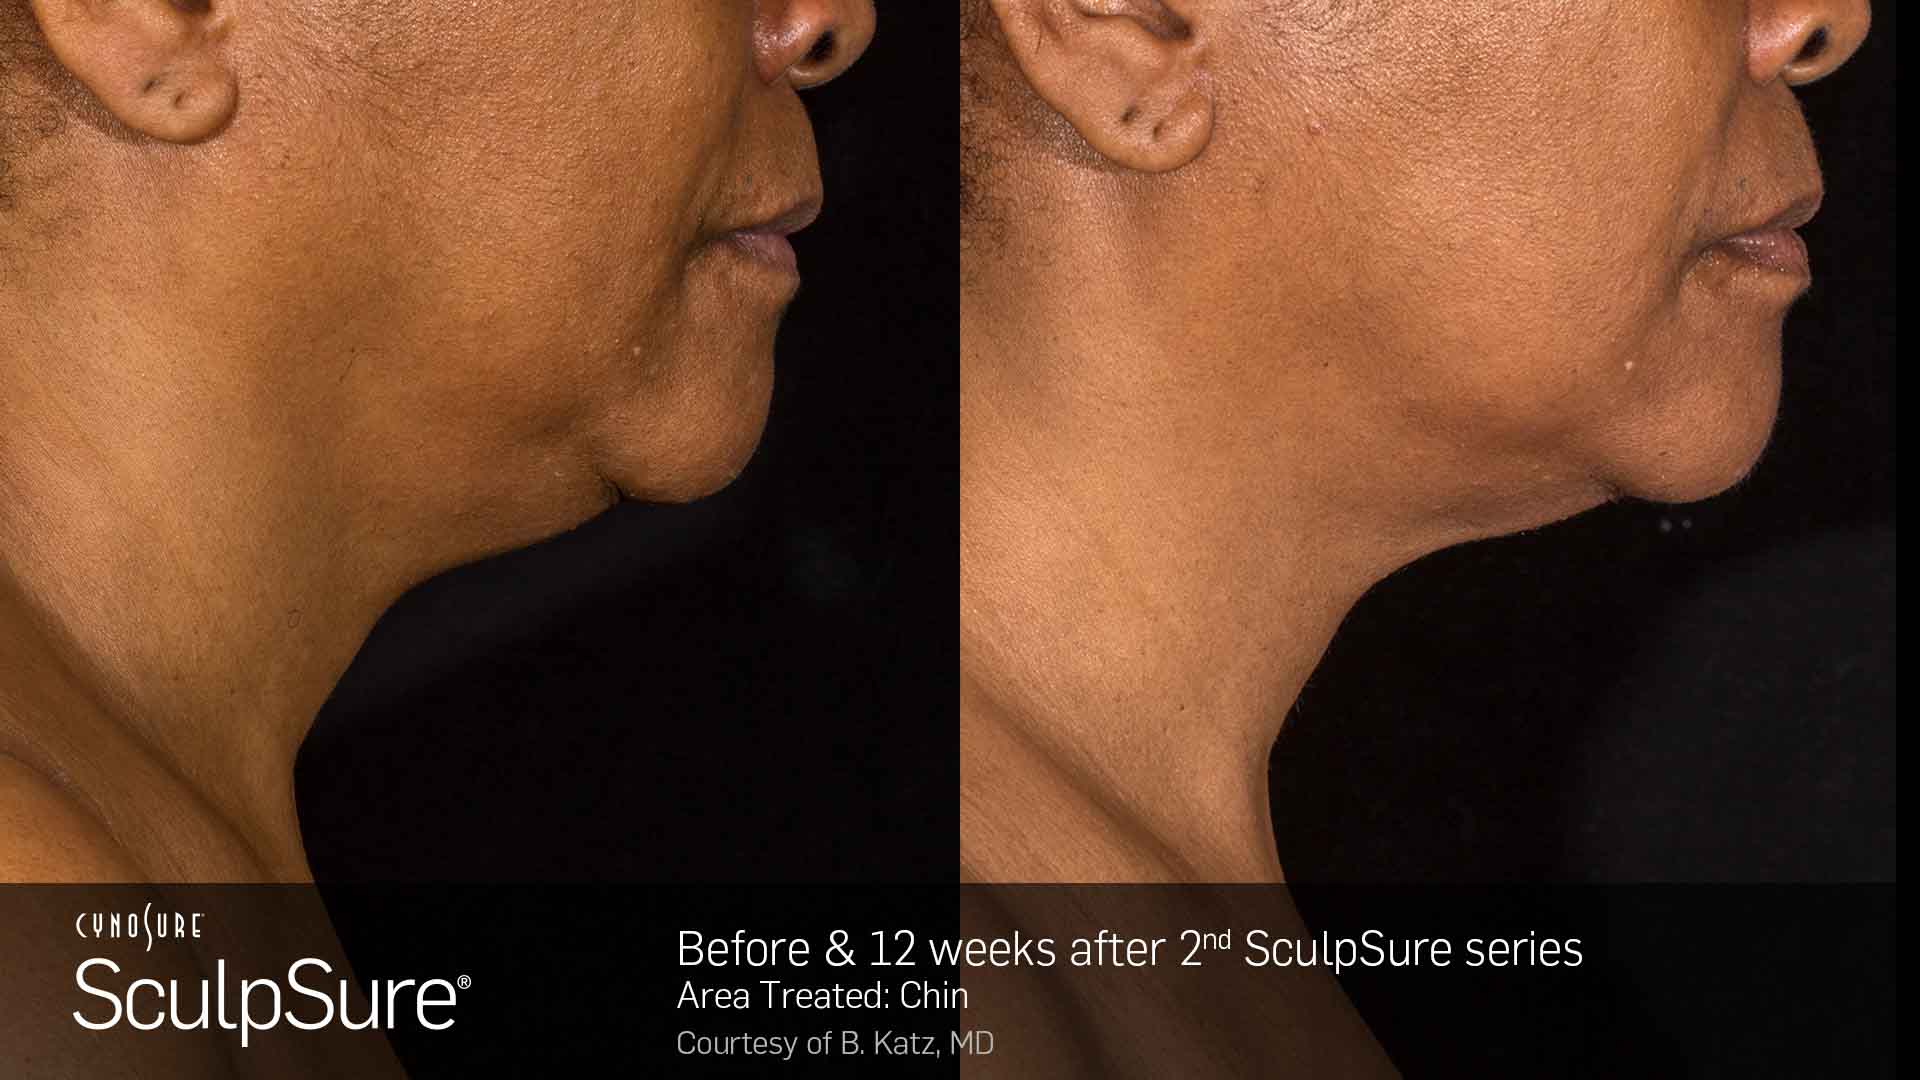 Laser Body Contouring - Before and After